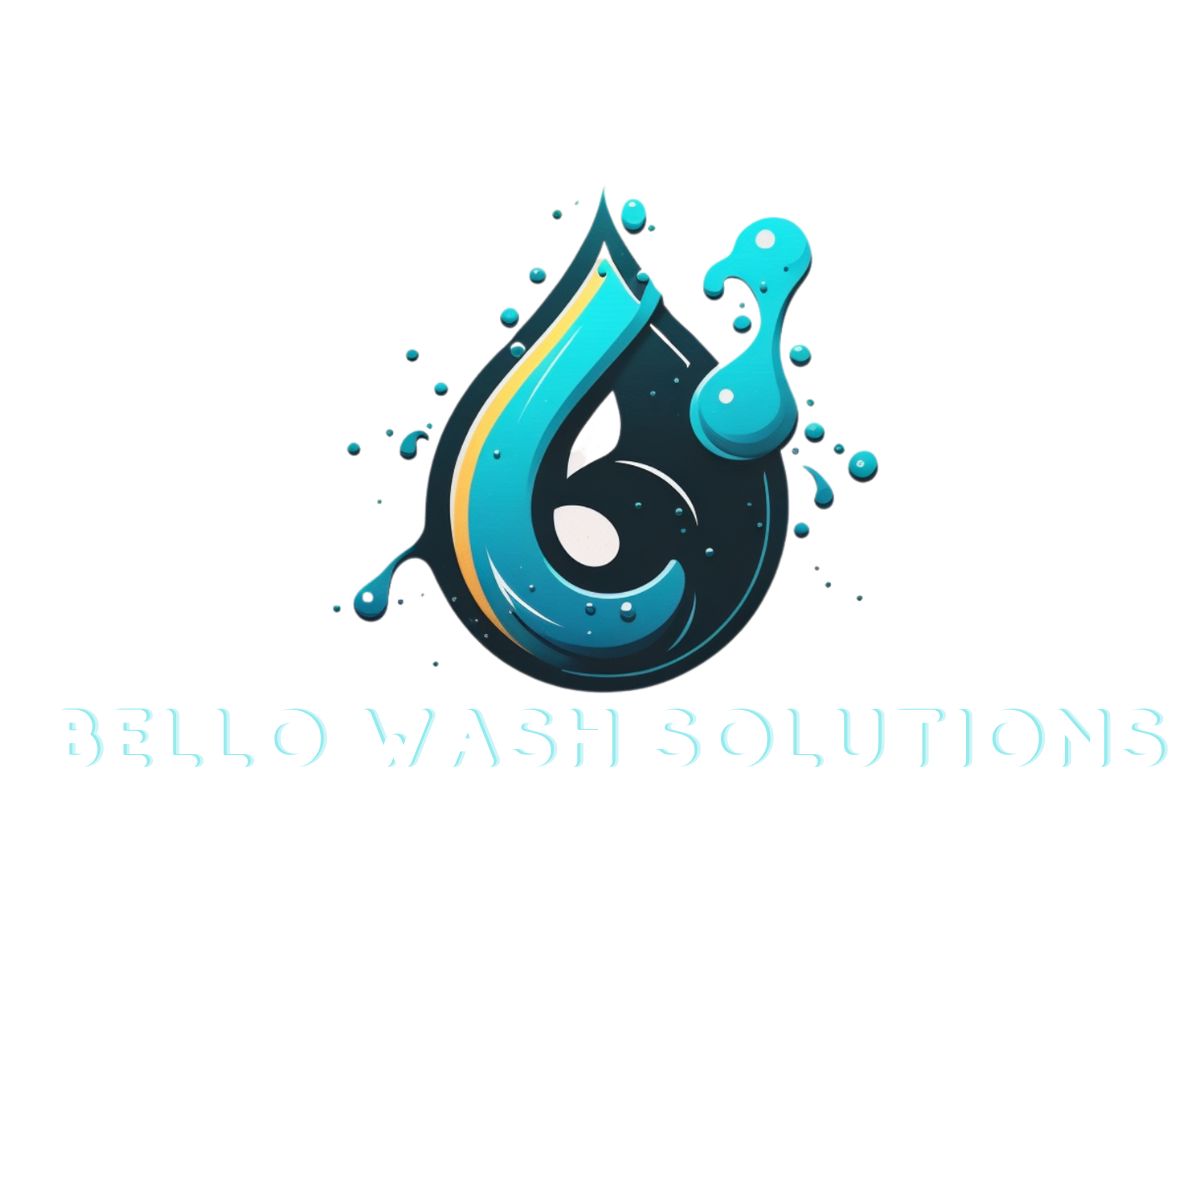 Bello Wash Solutions Logo in different colors